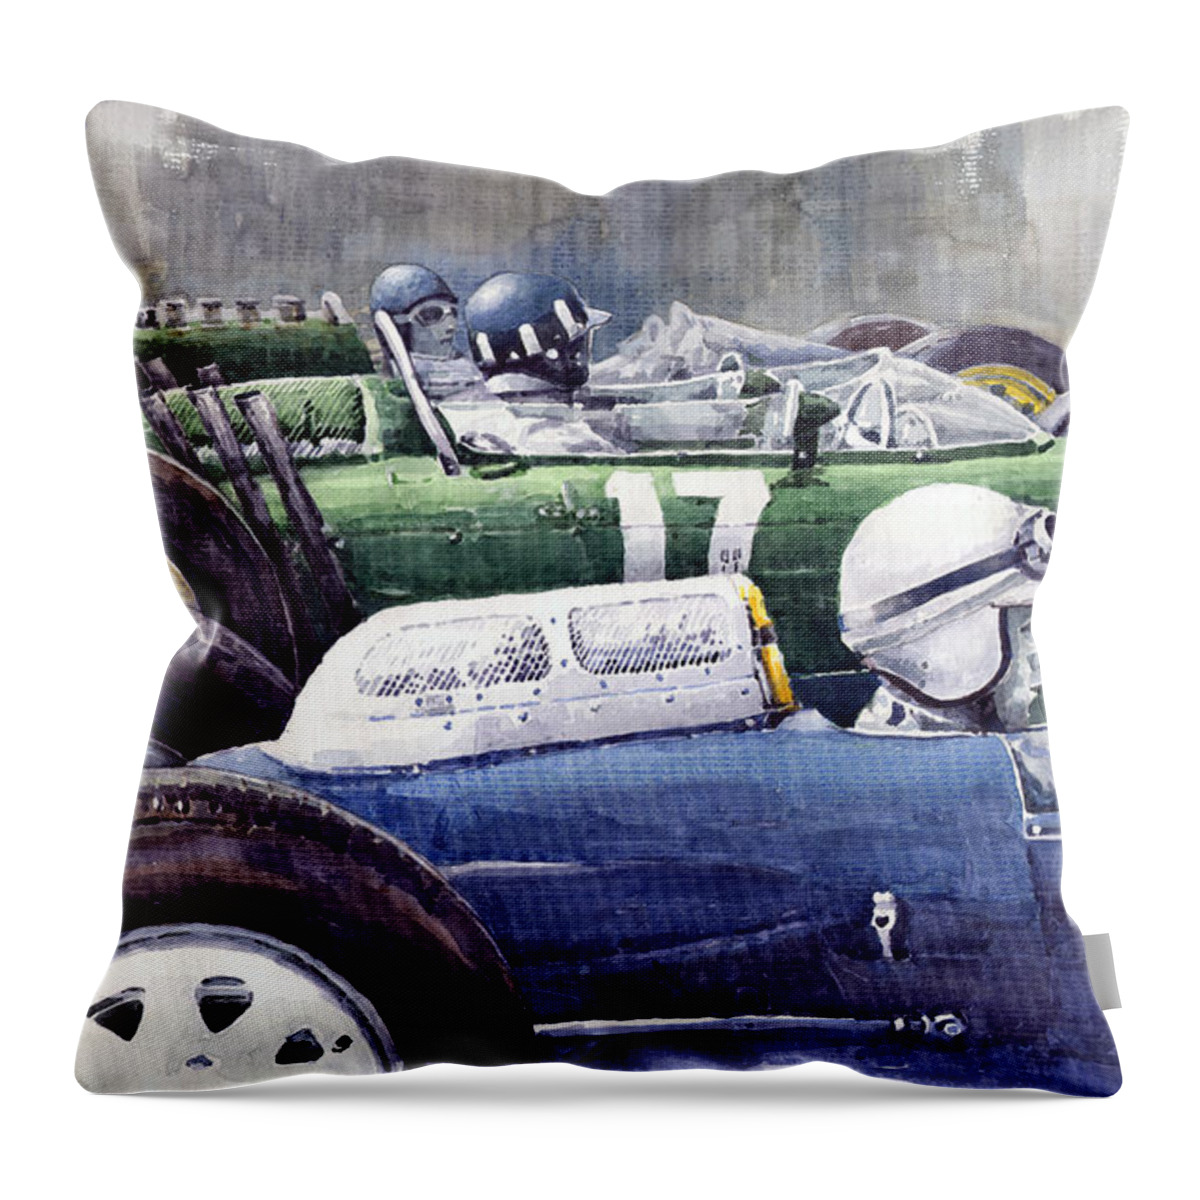 Watercolour Throw Pillow featuring the painting Datch GP 1962 Lola BRM Lotus by Yuriy Shevchuk